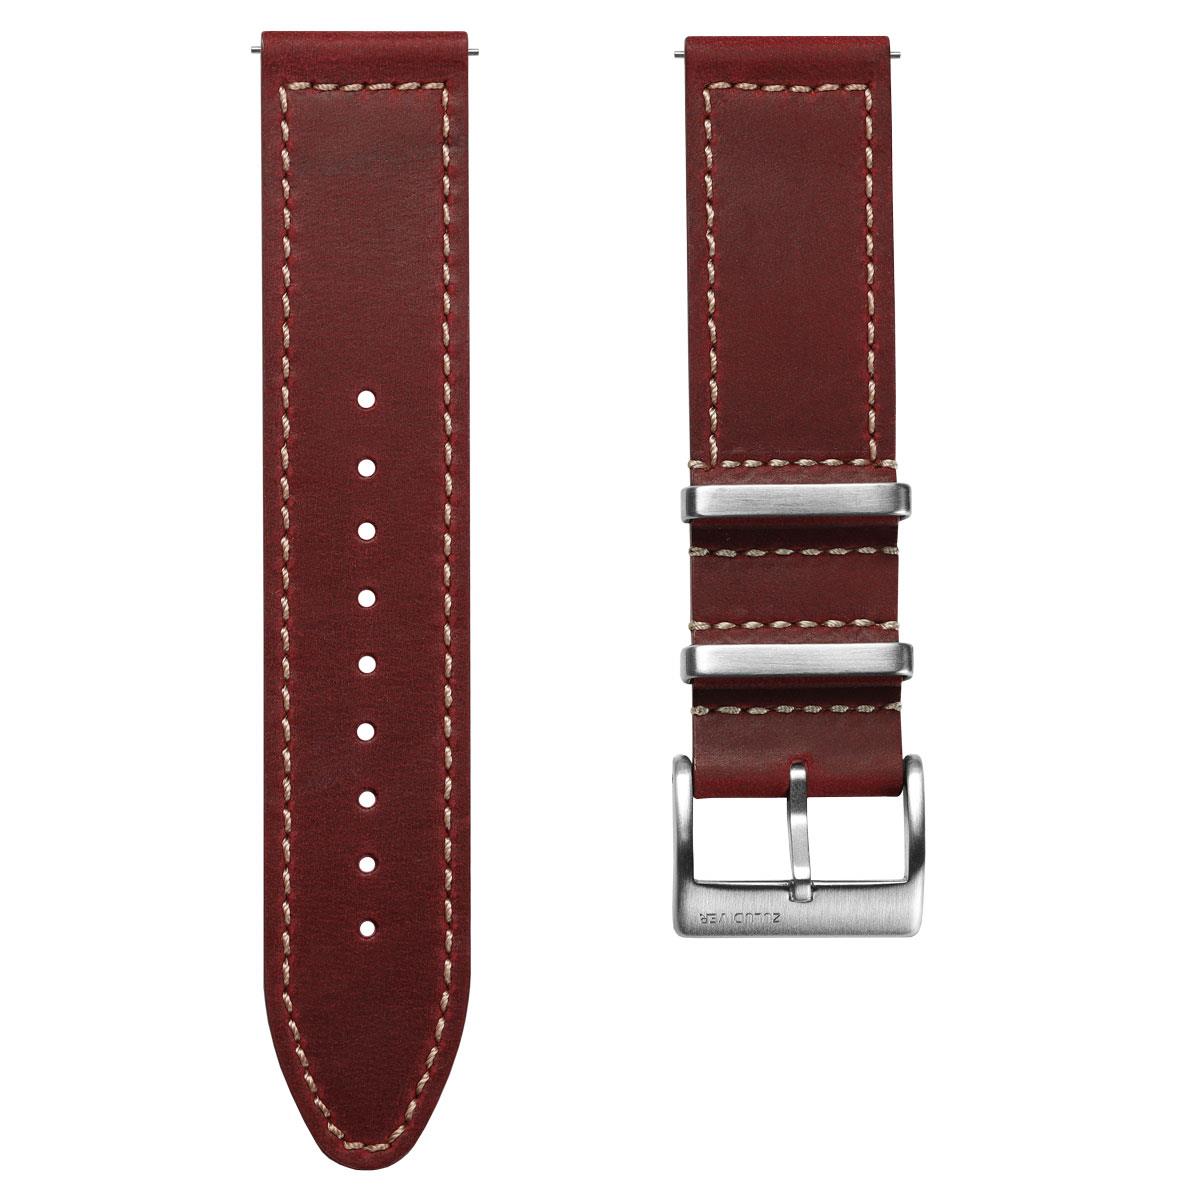 Oxford Ranger Military Leather Watch Strap - Vintage Red